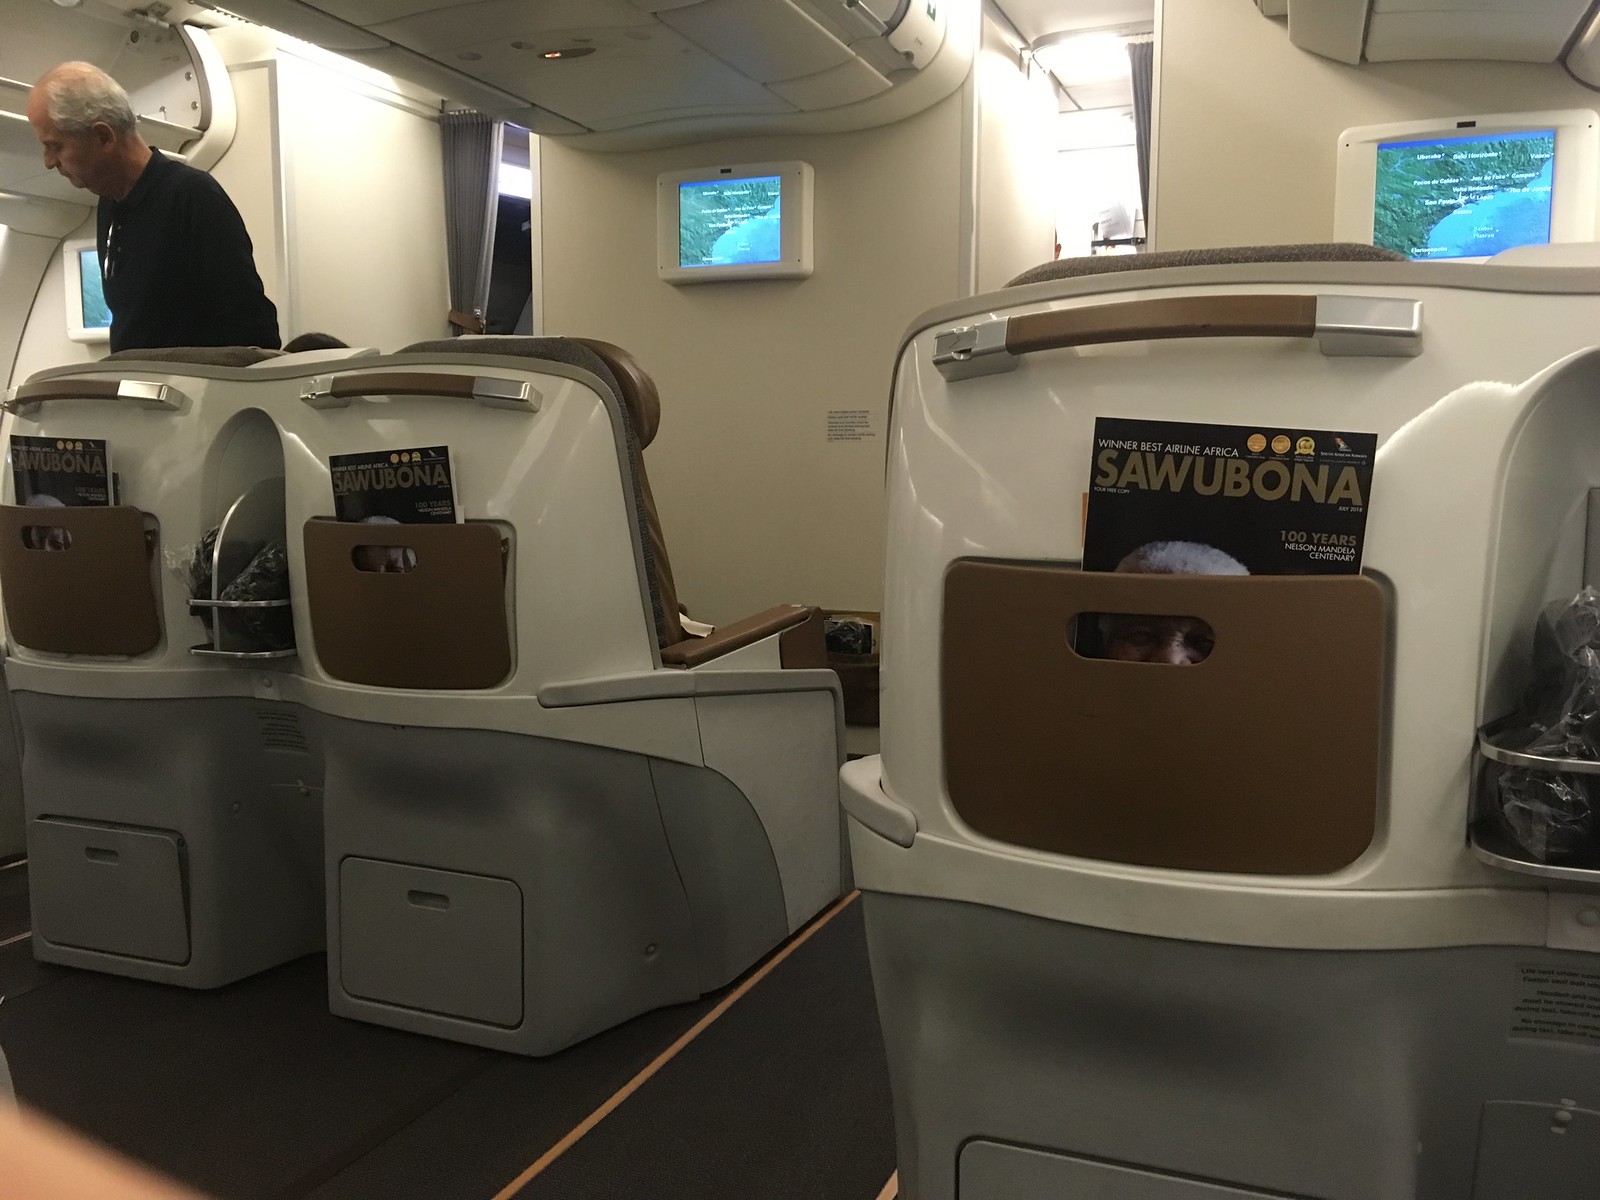 South African Airways business class Sao Paulo to Johannesburg